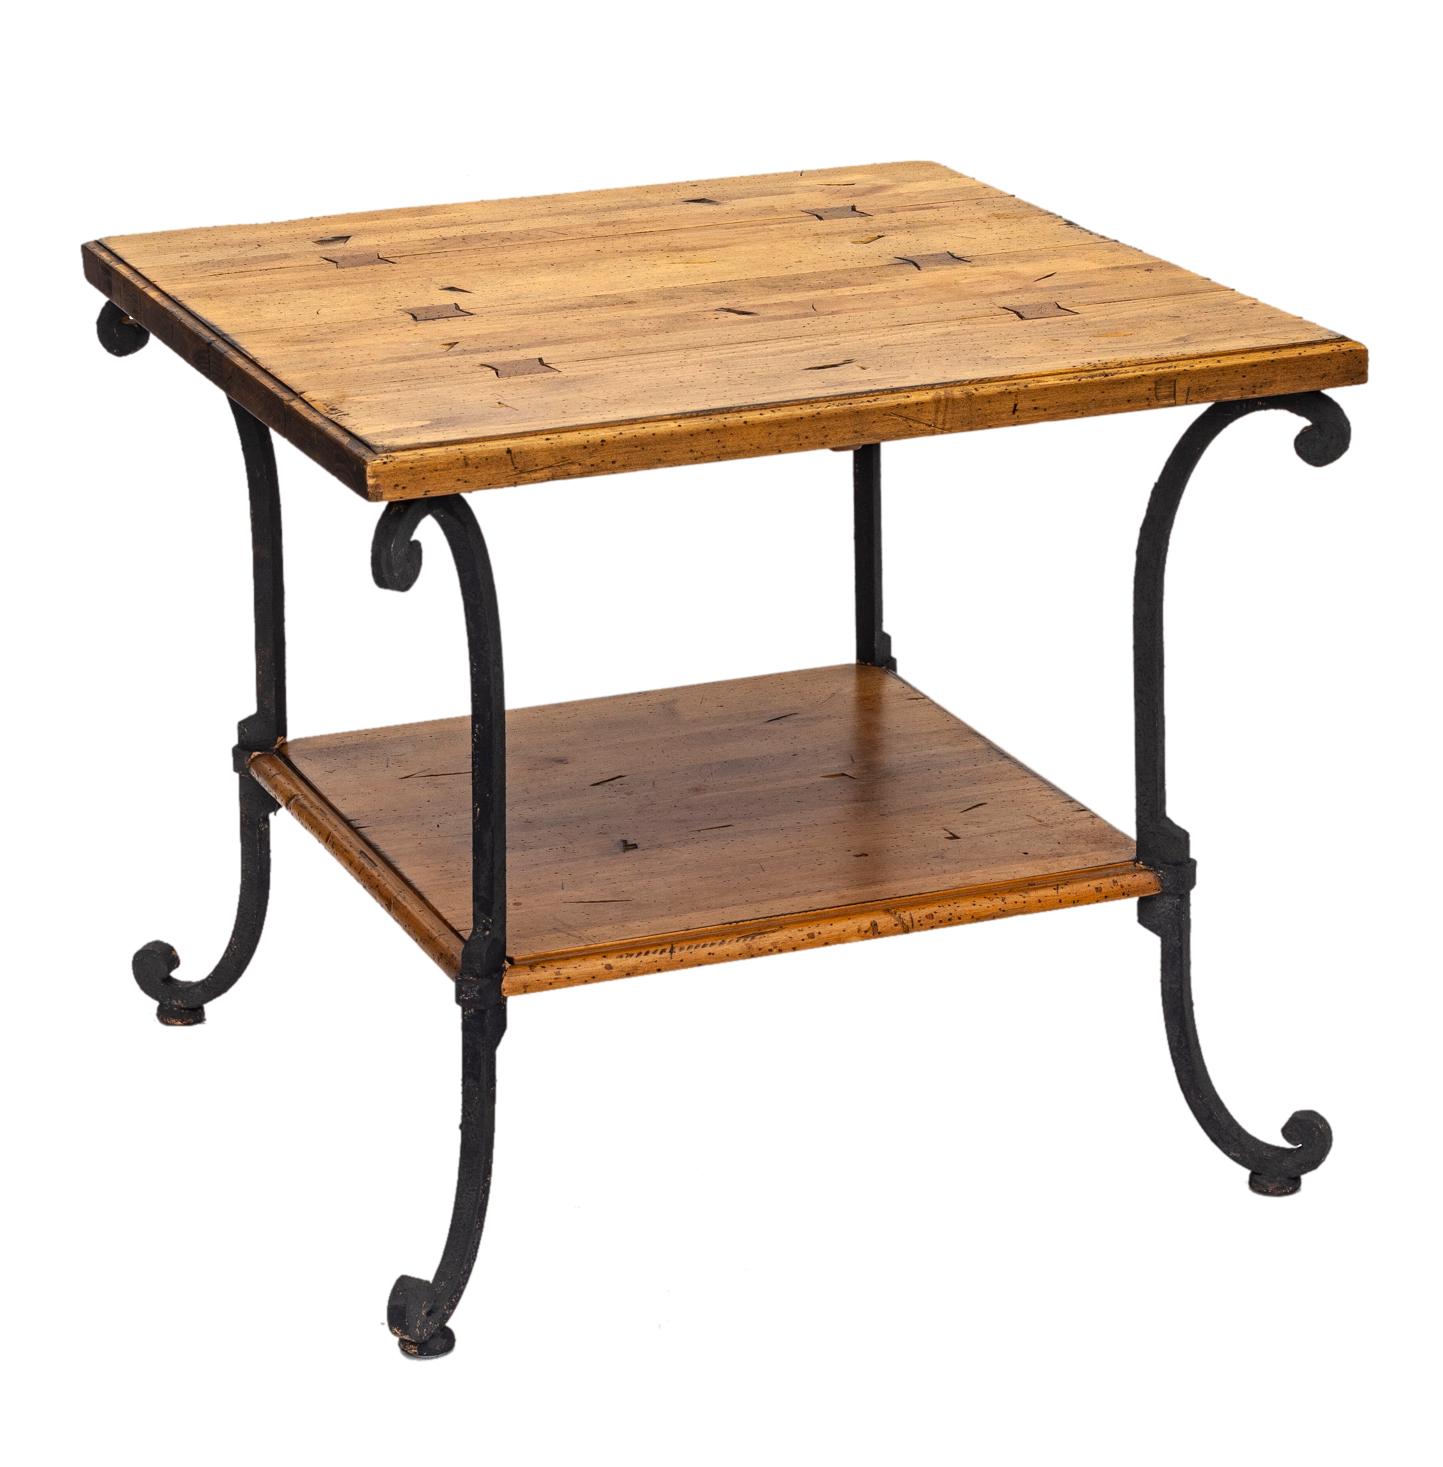 Rustic Two-Tiered Pine Table with Wrought Iron Legs For Sale